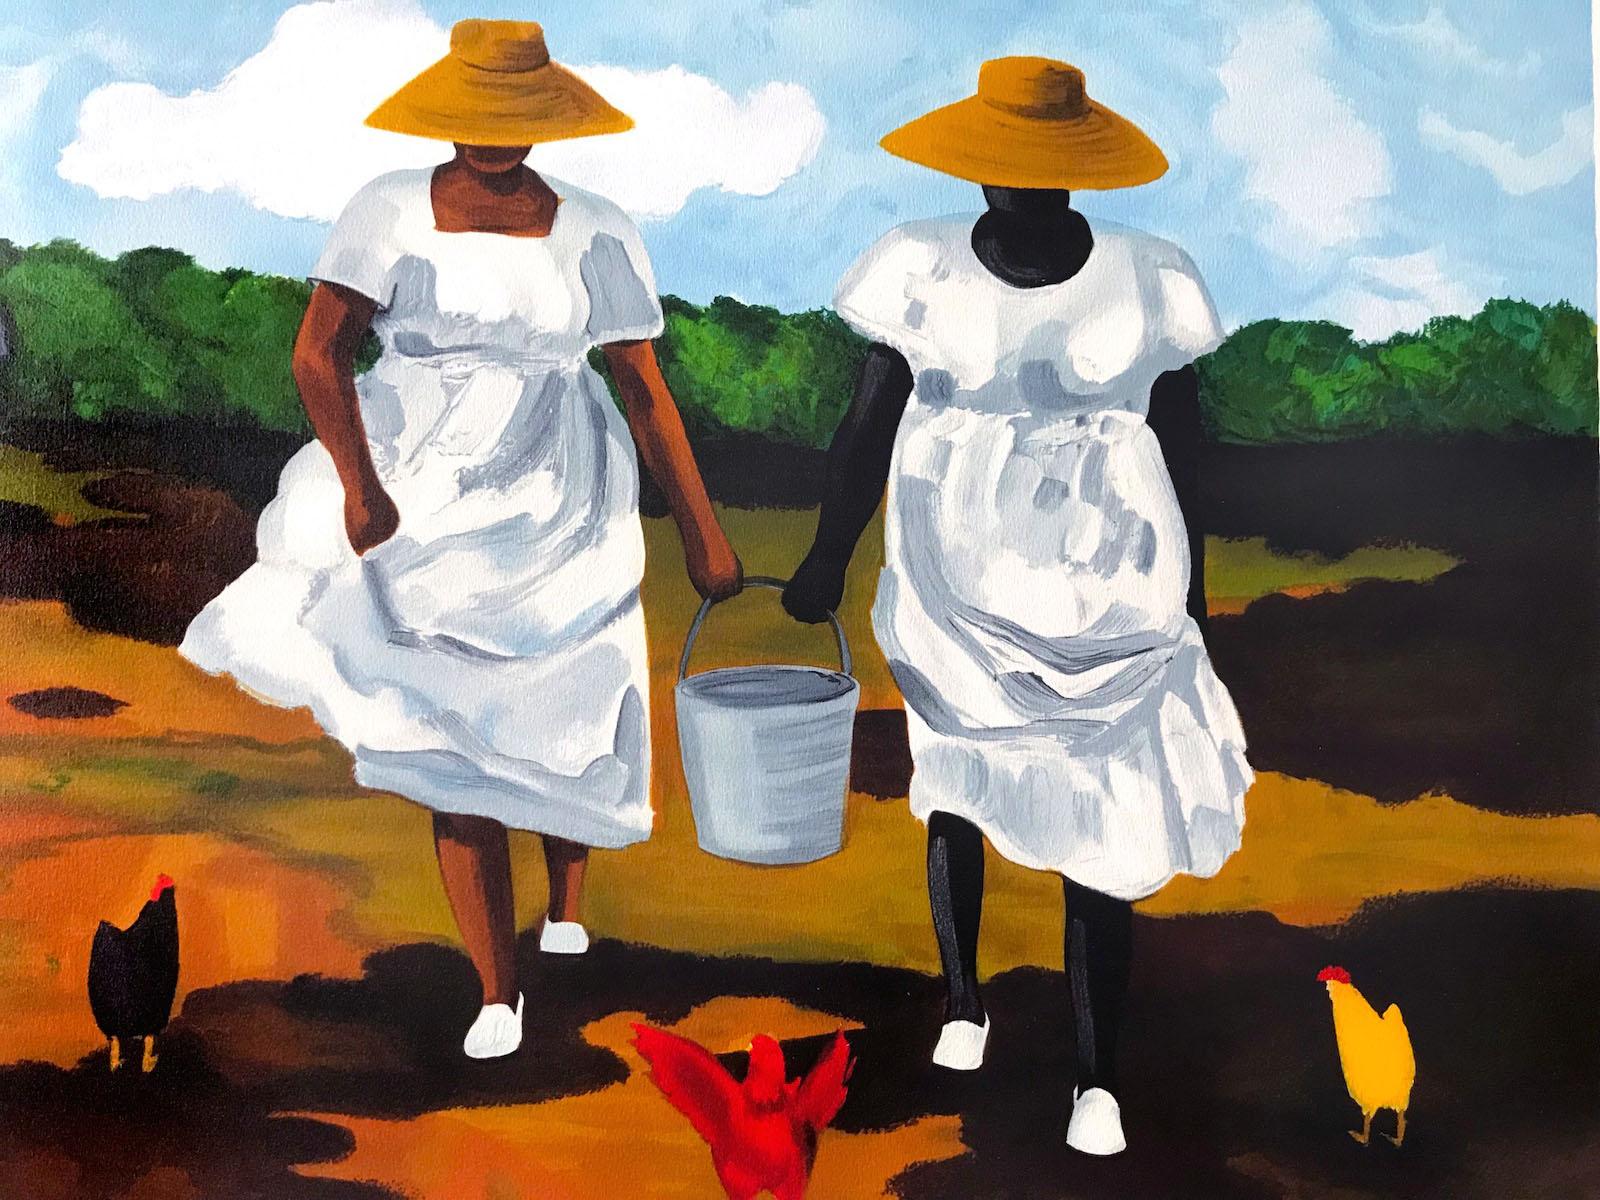 Jonathan Green Figurative Print - Sharing The Chores, Signed Lithograph, African American Heritage, Gullah Culture